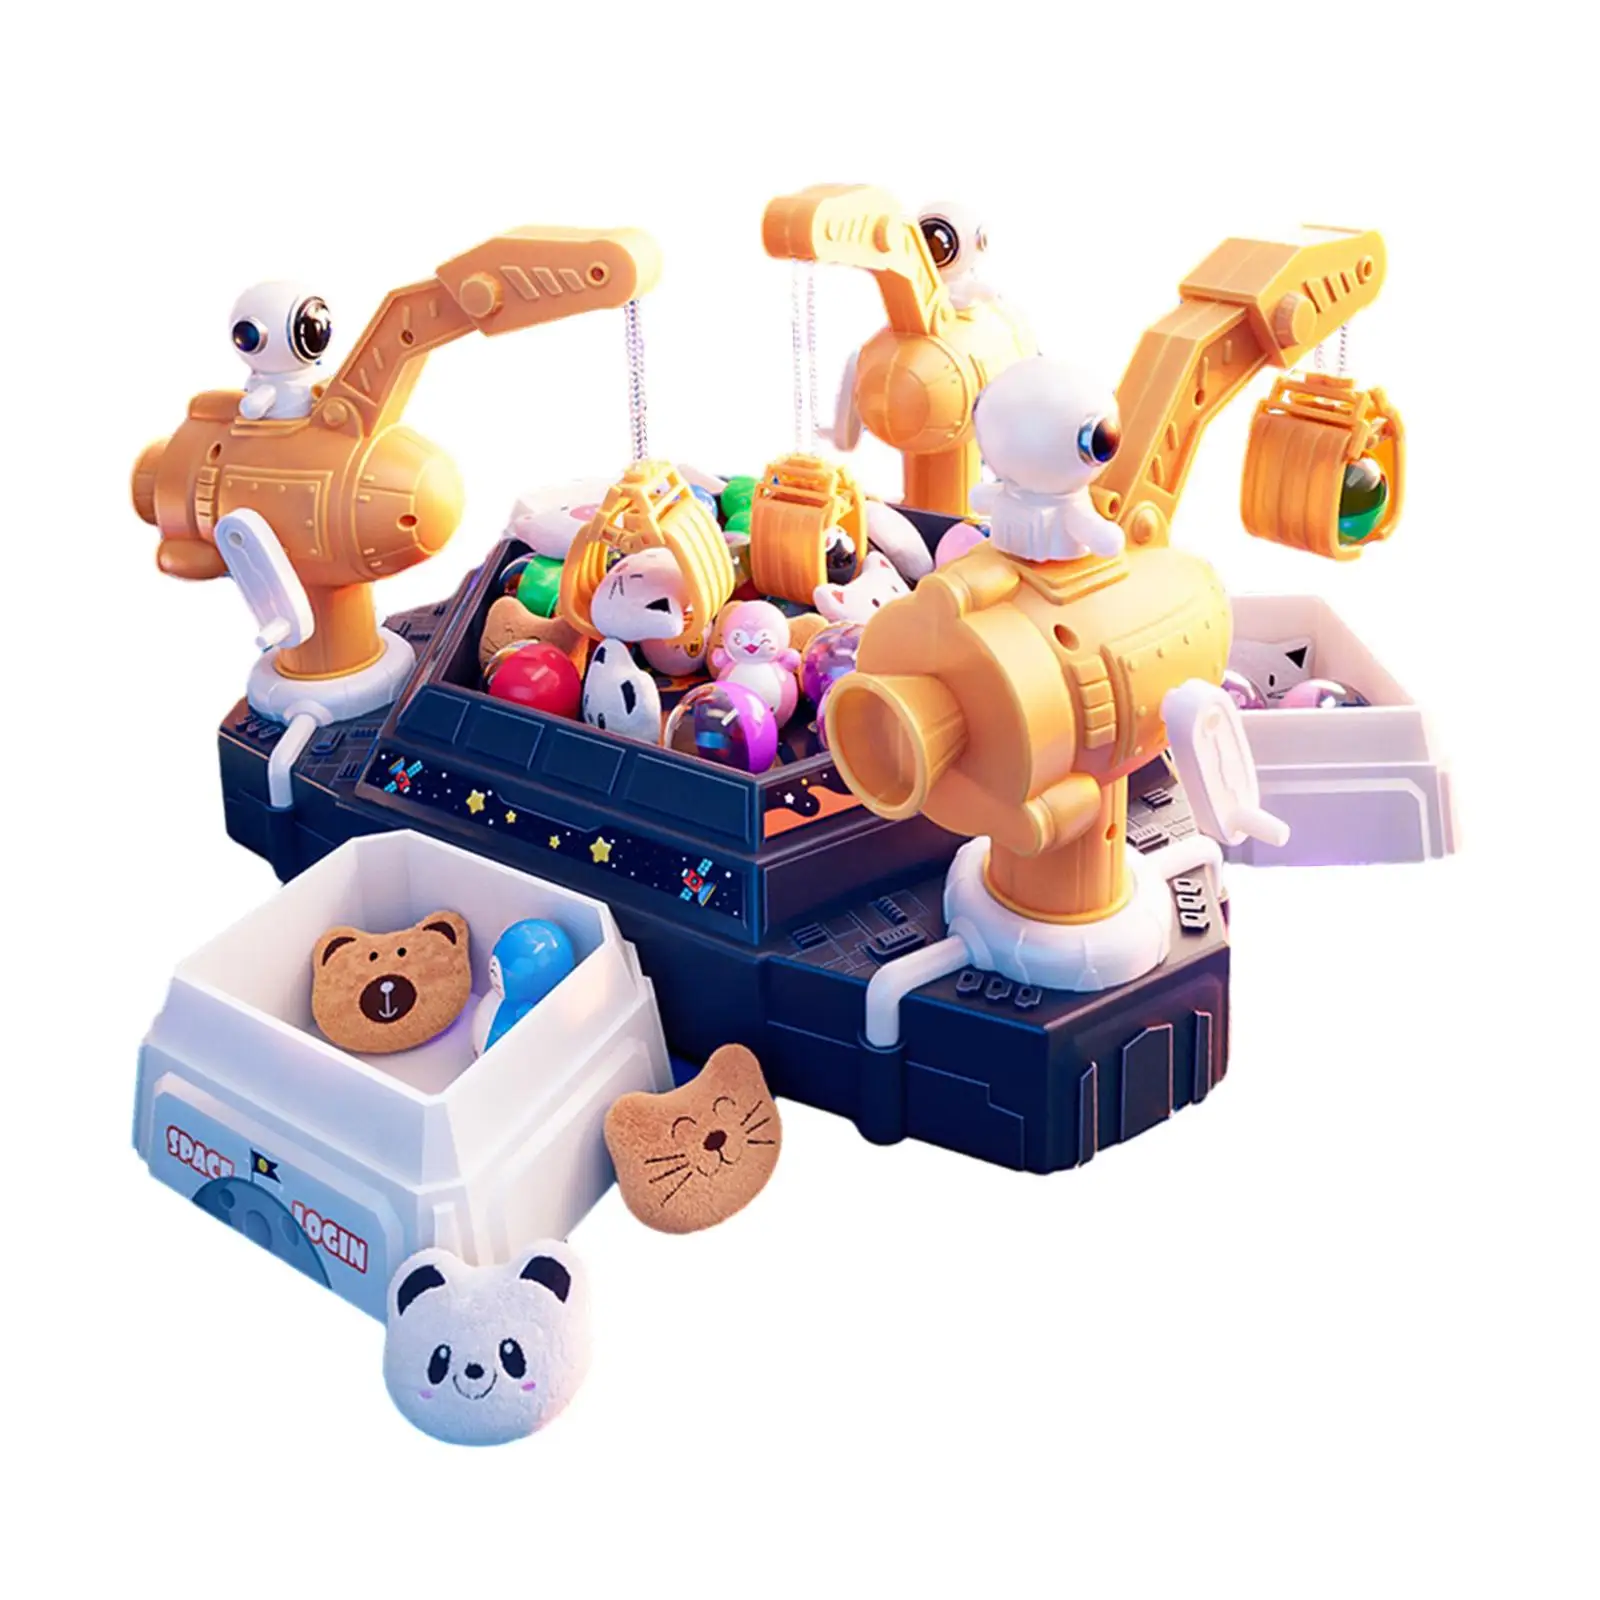 Electronic Small Toys with 4 Mini Plush Dolls Capsules Claw Machine Arcade Game for Adults Girls Boys Aged 3-12 Kids Home